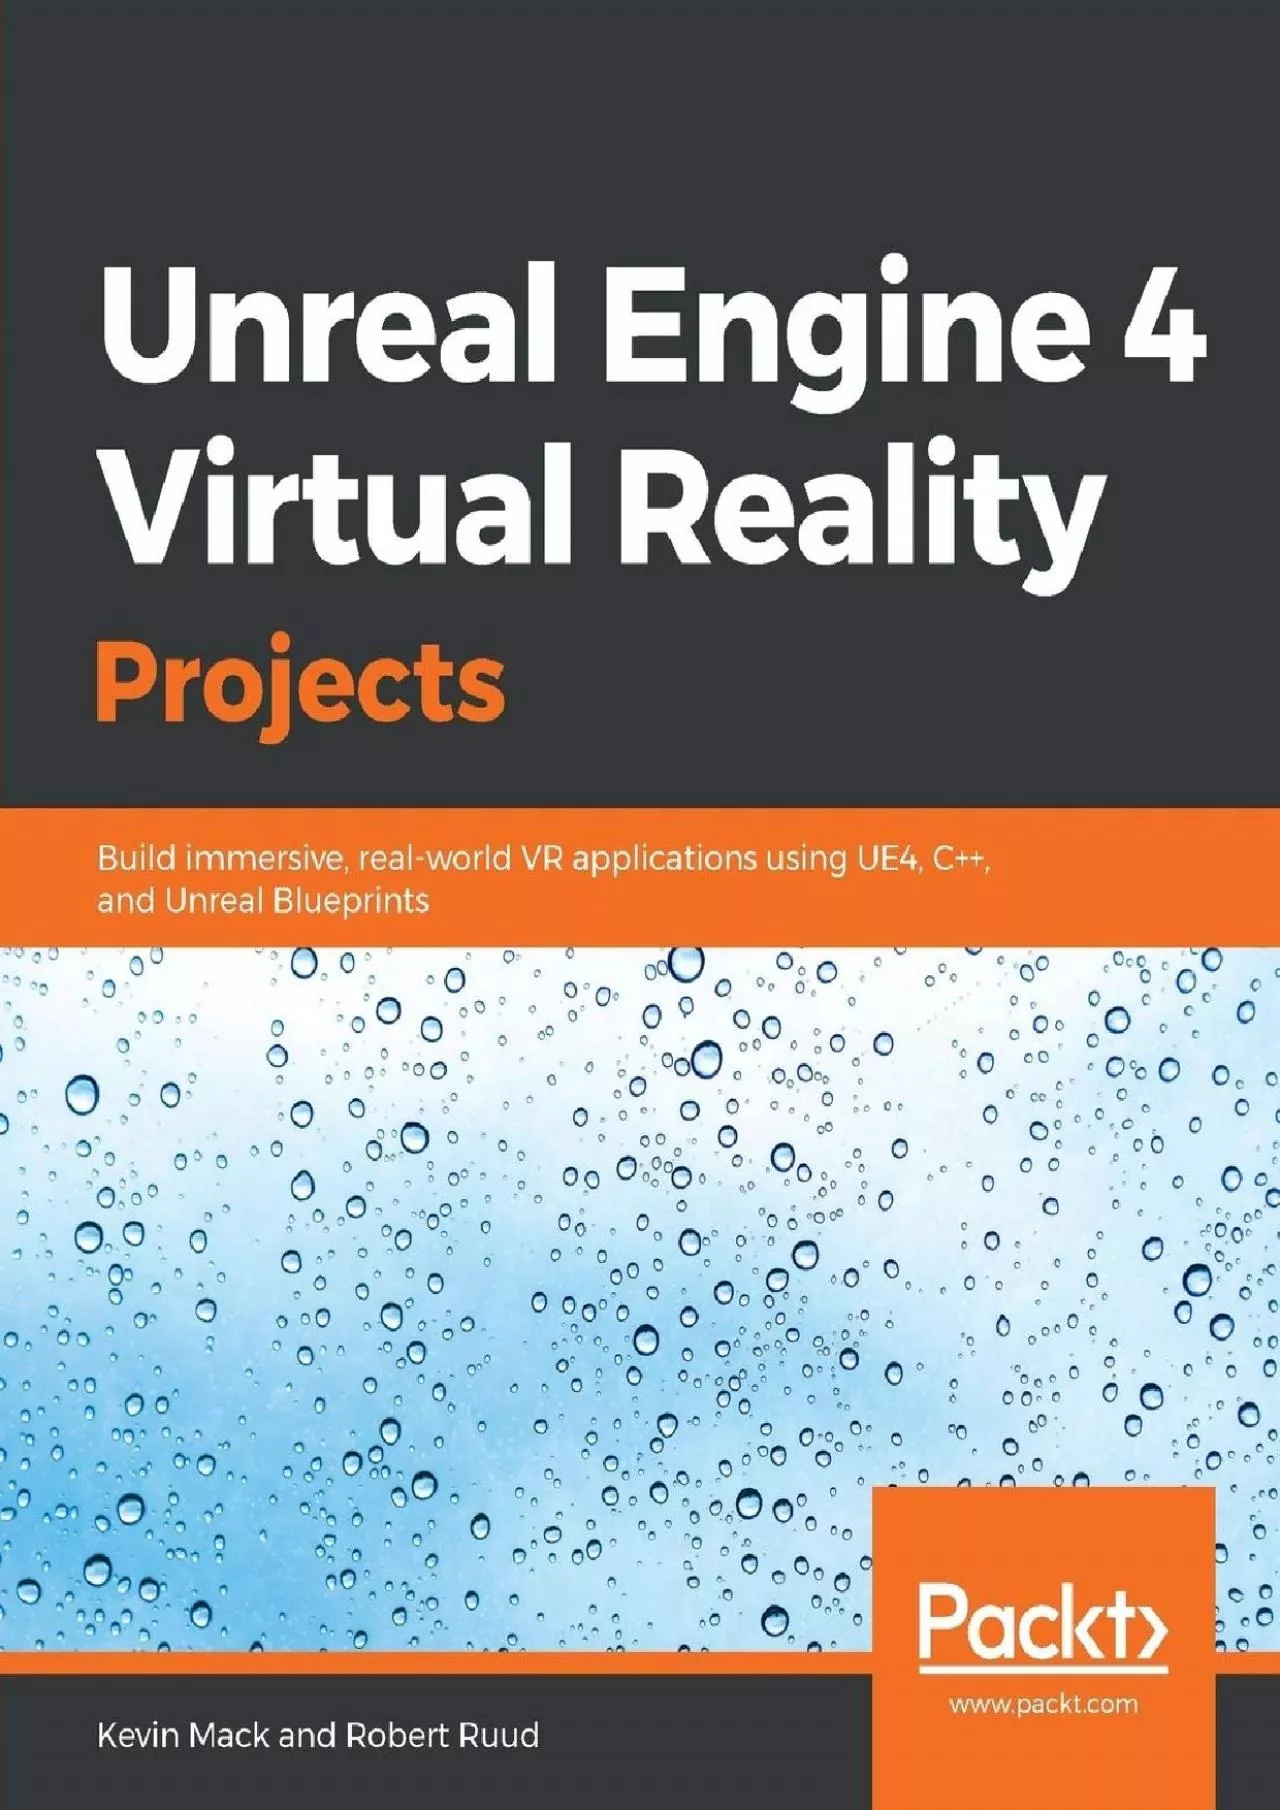 [READING BOOK]-Unreal Engine 4 Virtual Reality Projects: Build immersive, real-world VR